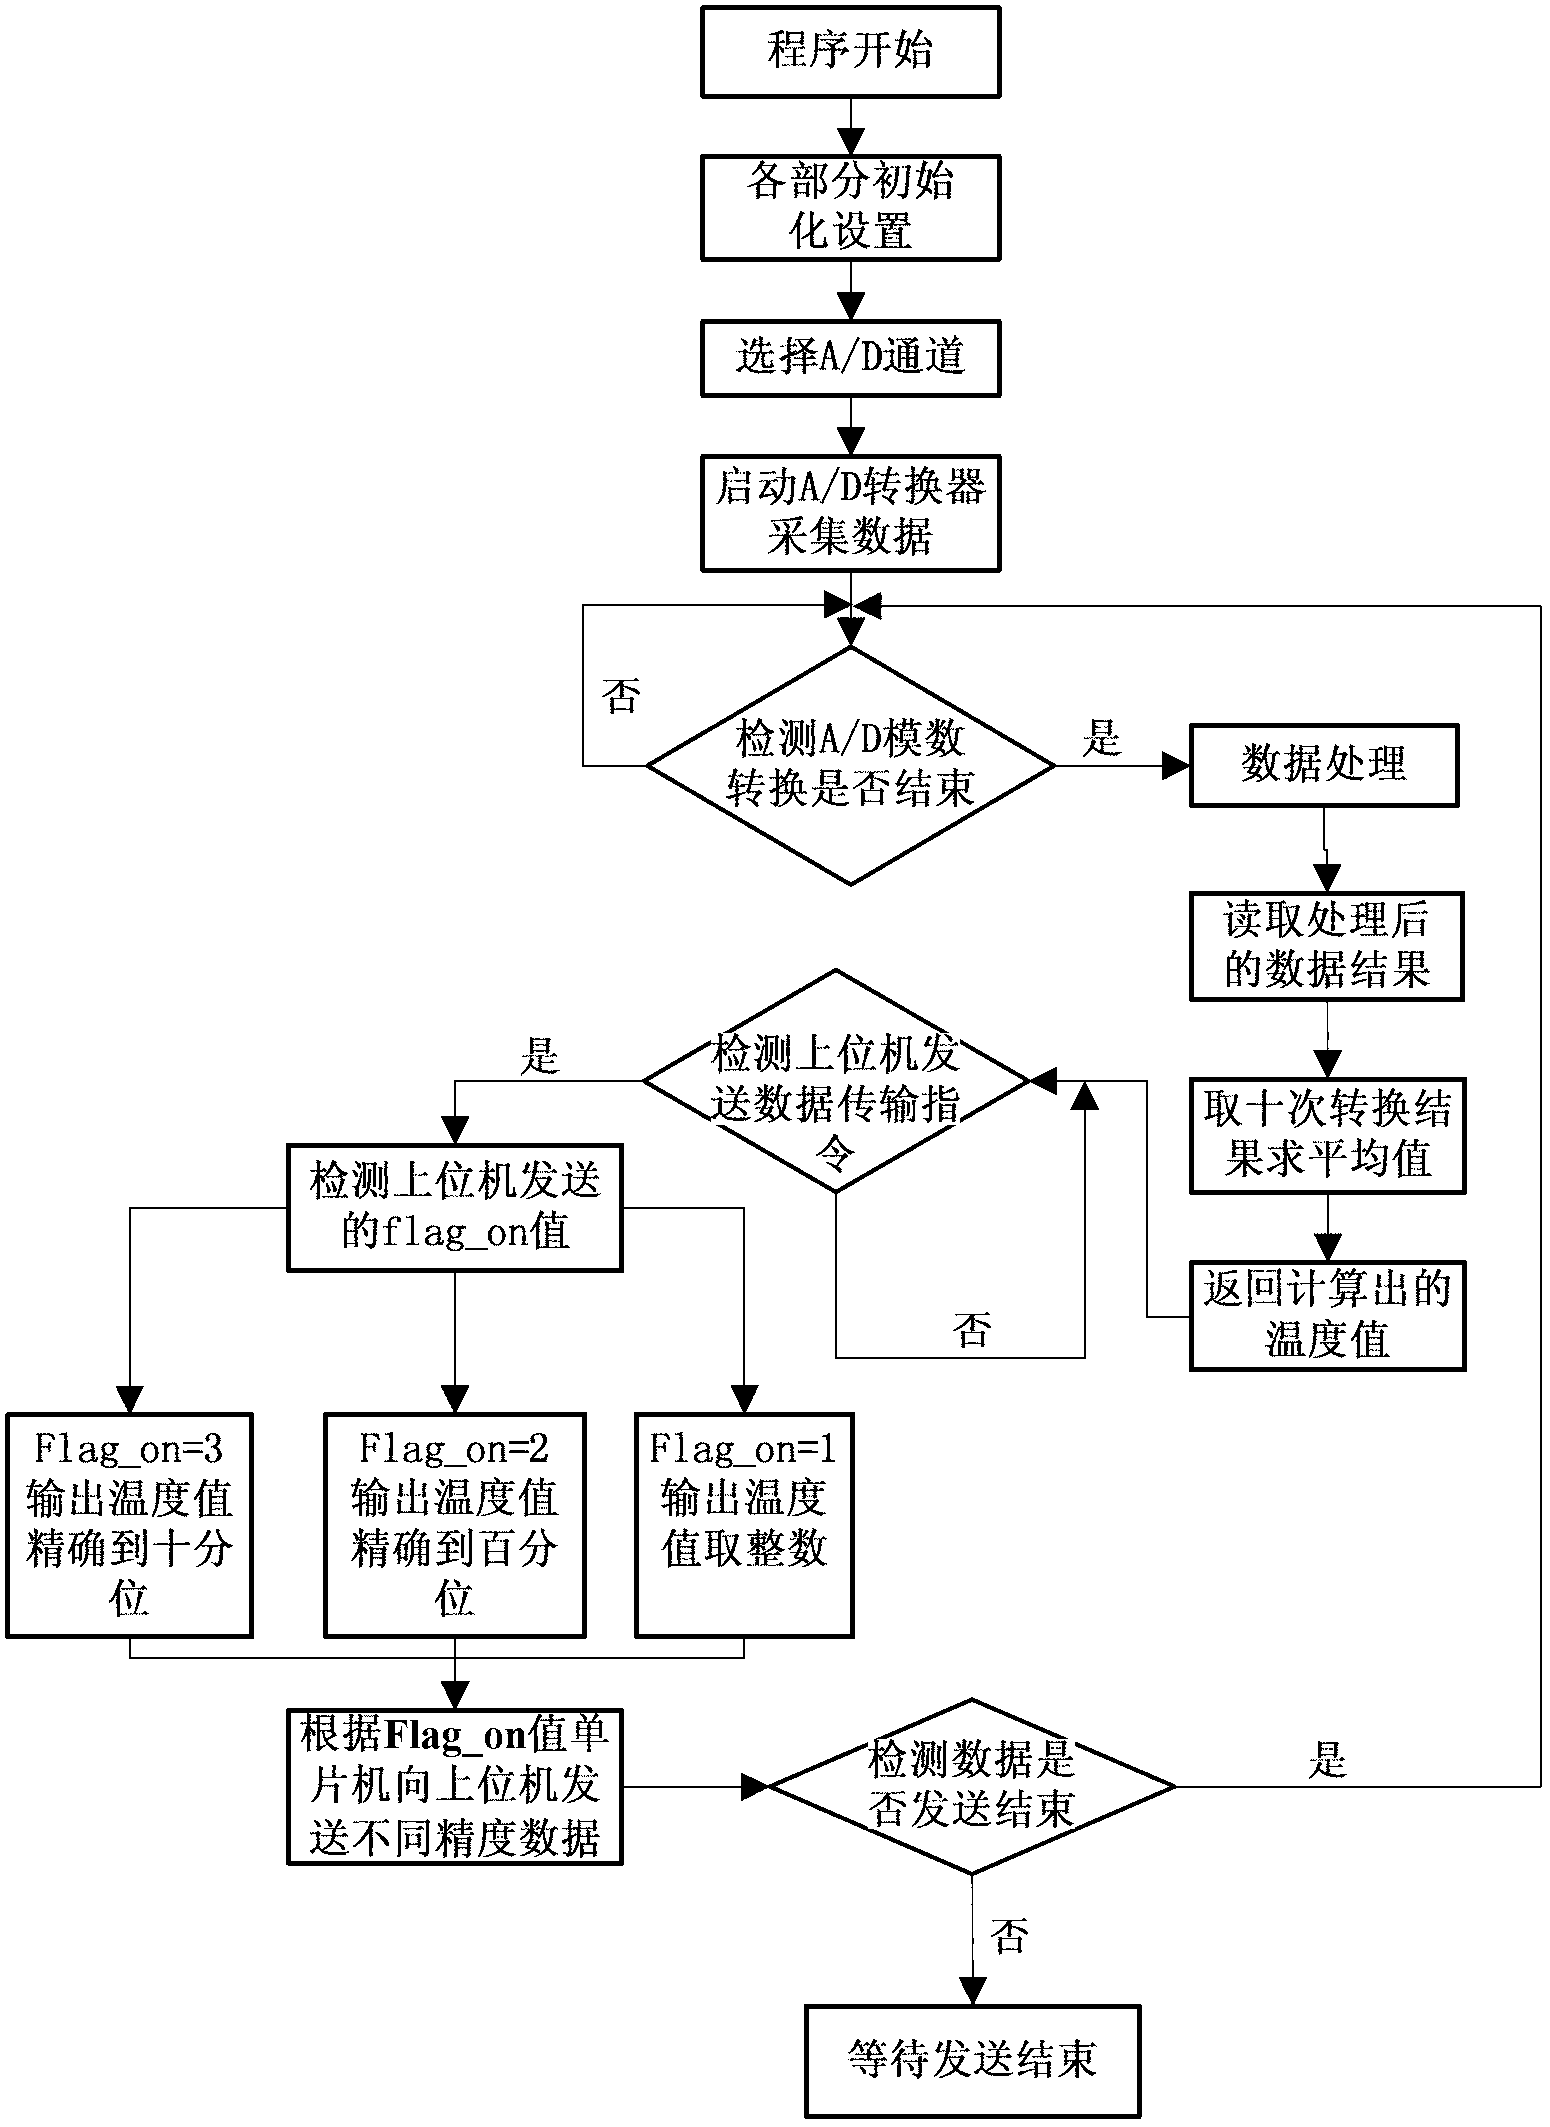 LabView-based real-time monitoring system for laser cladding/laser re-melting process temperature field